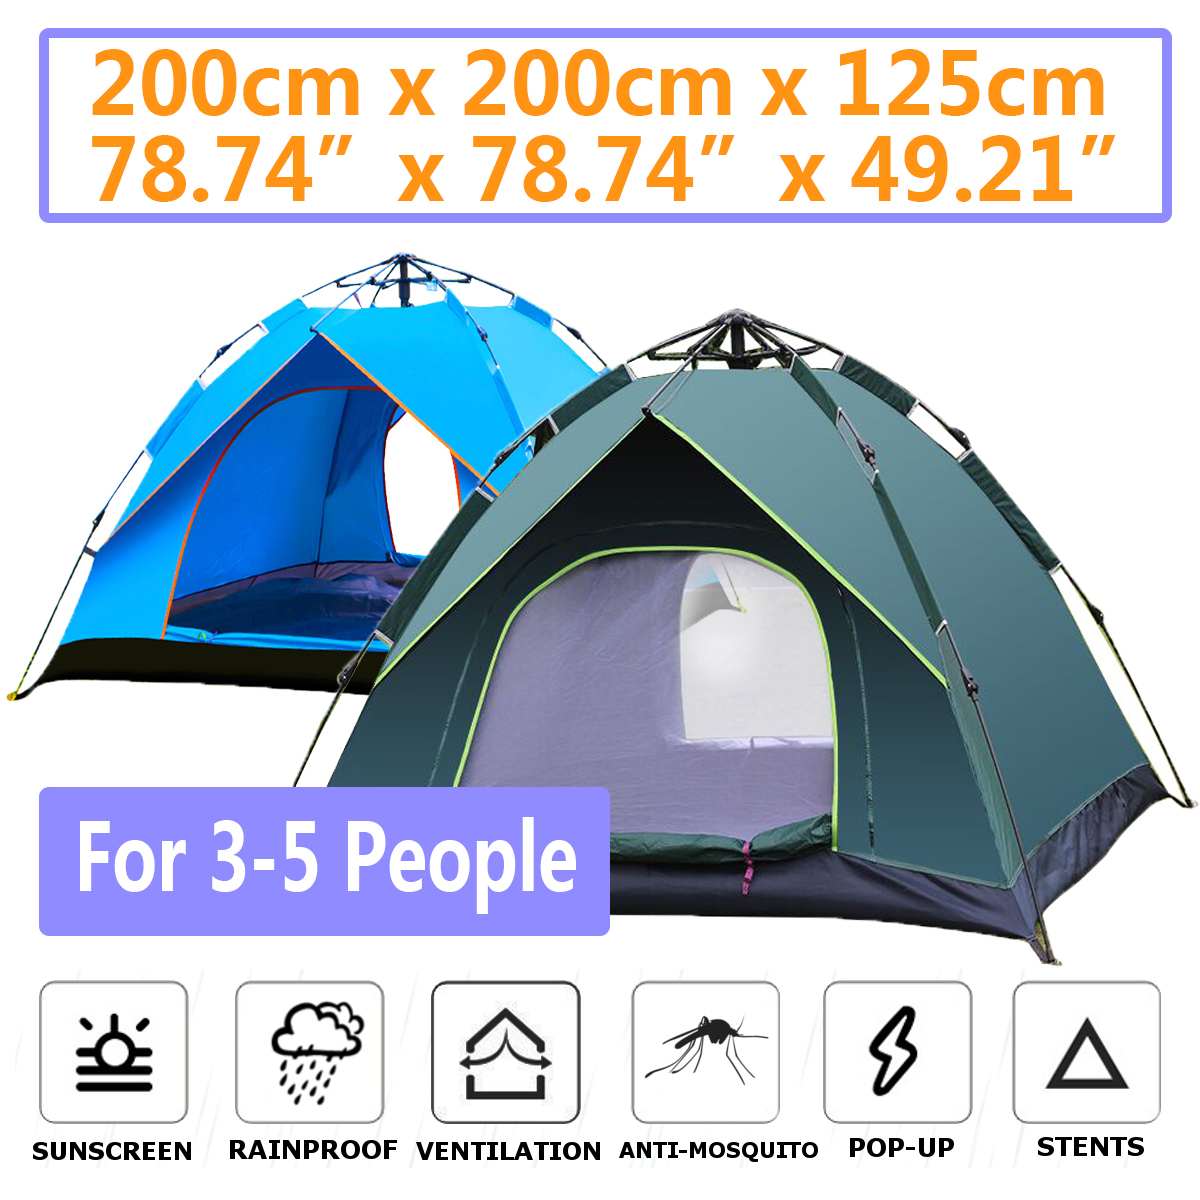 Cheap Goat Tents 3 5 People Large Tent Quick Setup Family Tent Outdoor Waterproof UV Protection Camping Hiking Foldable Folding Tent Family Tents Tents 